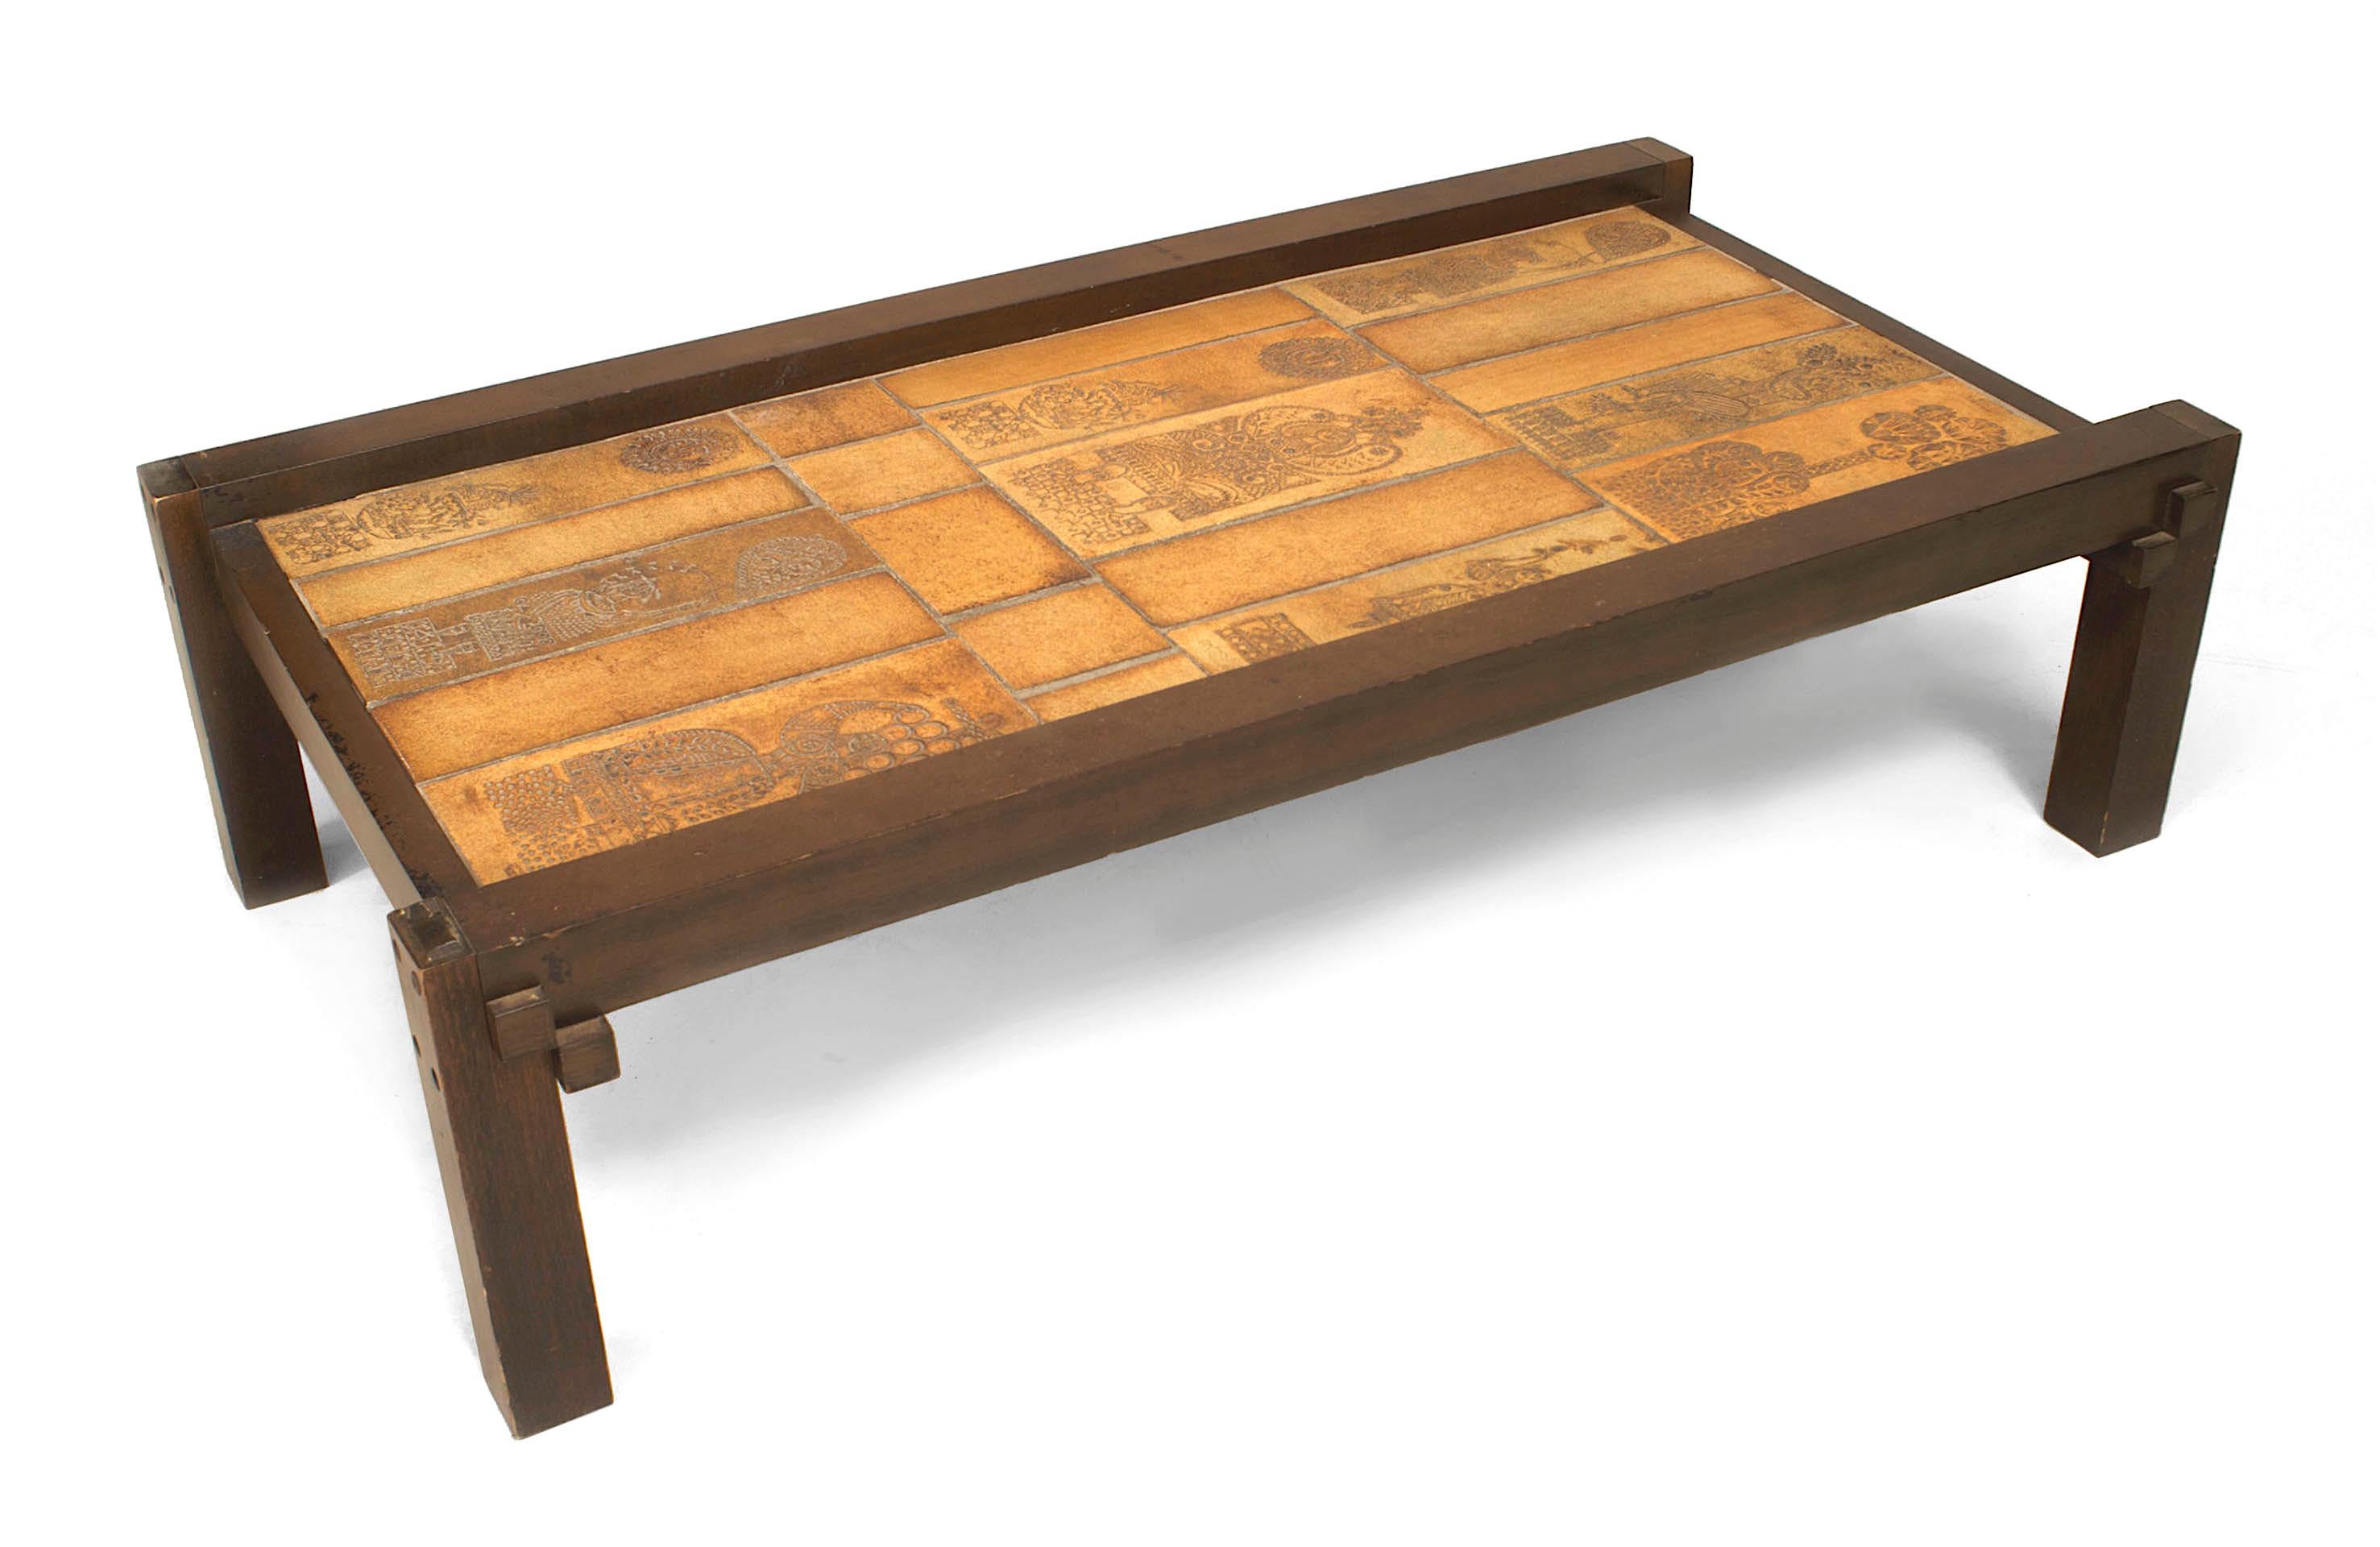 French Mid-Century (1960s) rectangular coffee table with a brown painted wood frame supporting a ceramic tile top decorated with stylized figures. (signed: ROGER CAPRON)
